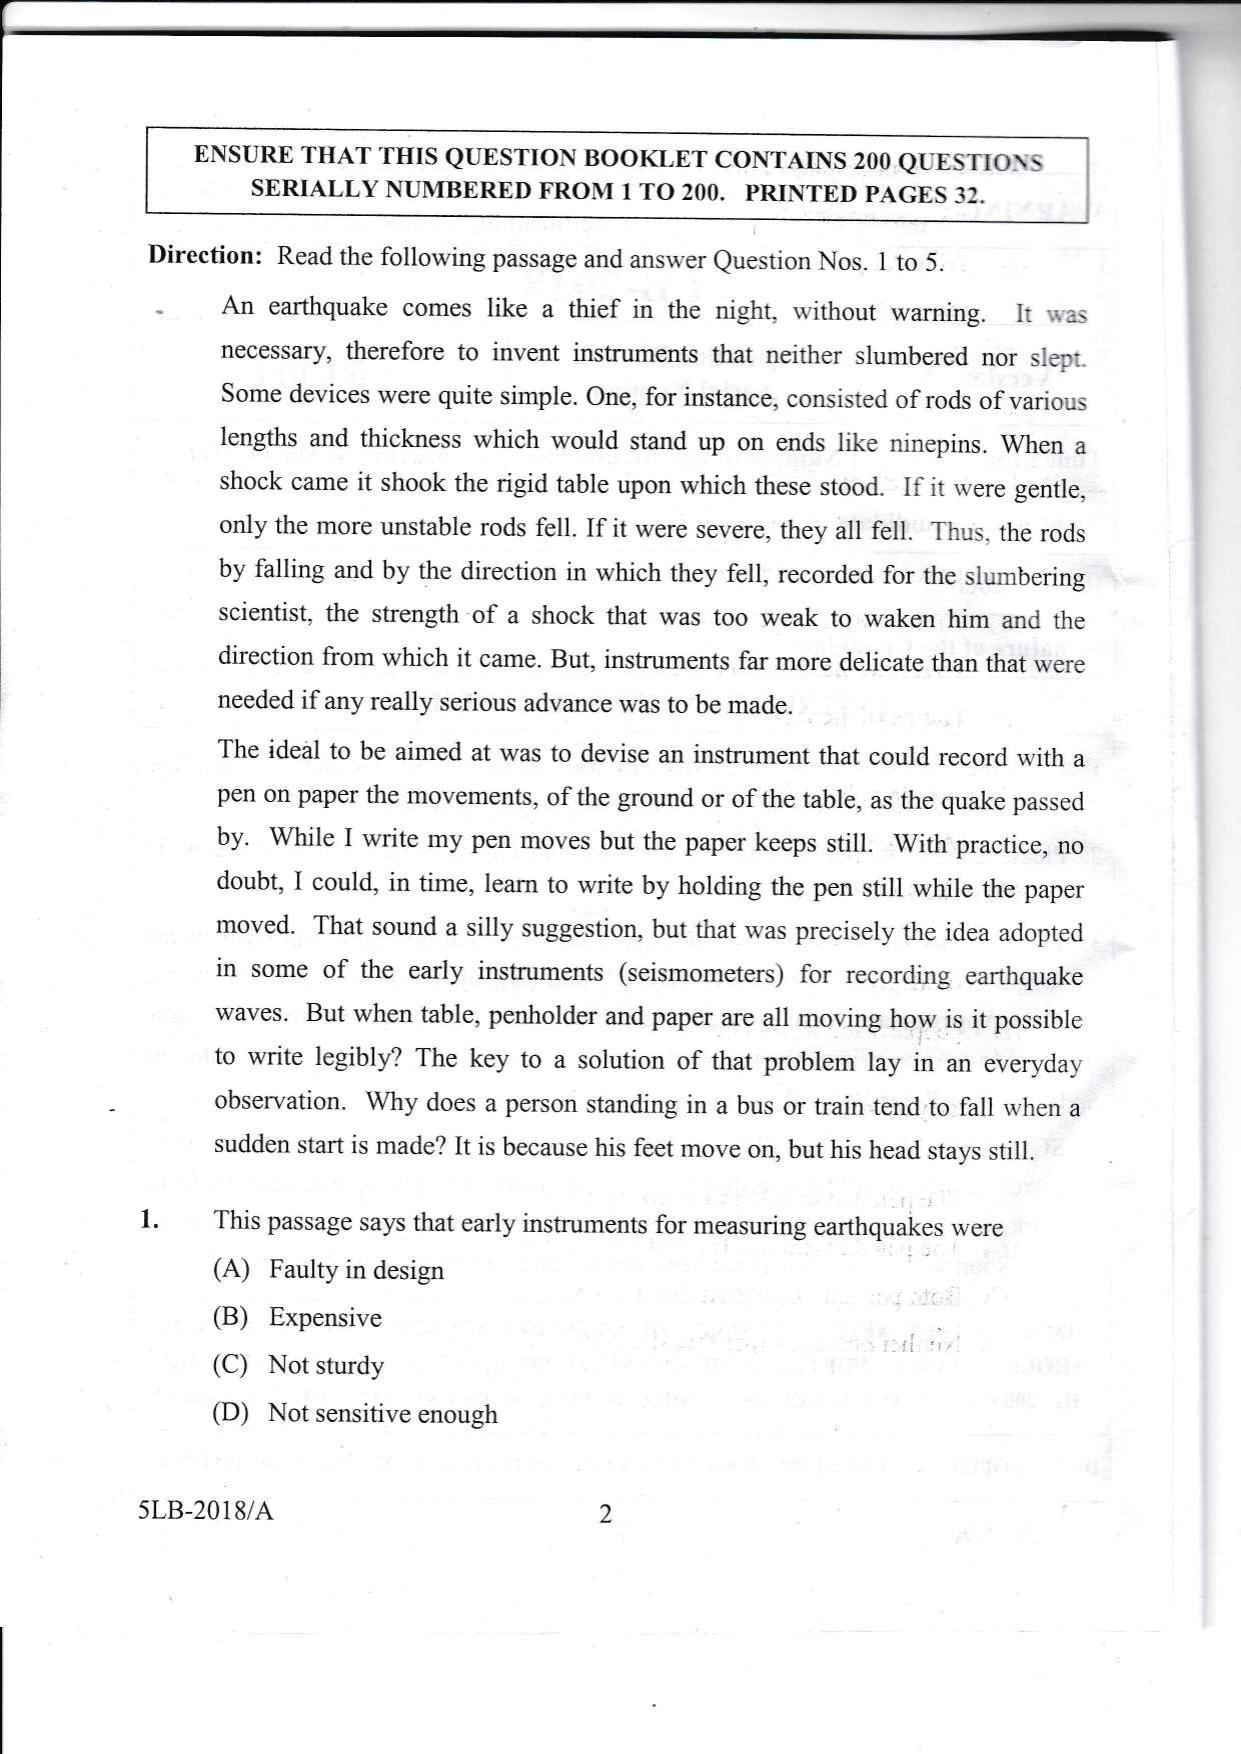 KLEE 5 Year LLB Exam 2018 Question Paper - Page 2